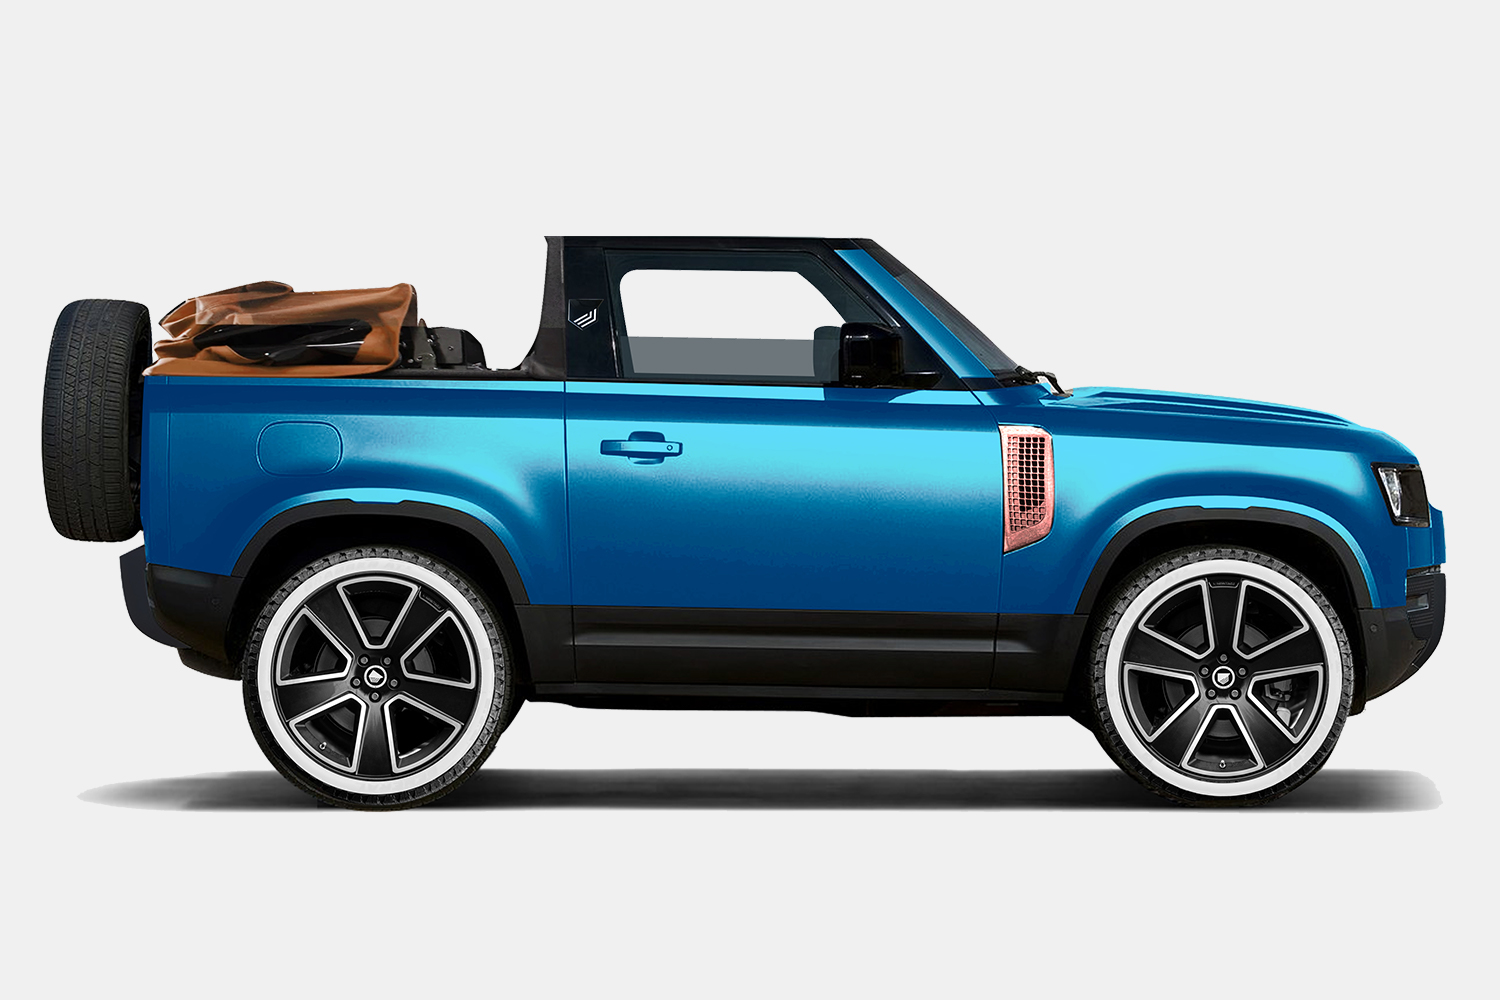 The new Valiance Convertible from Heritage Customs in Côte d’Azur blue. It's a new Land Rover Defender 90 with a soft top that's available in a limited-run in 2022.